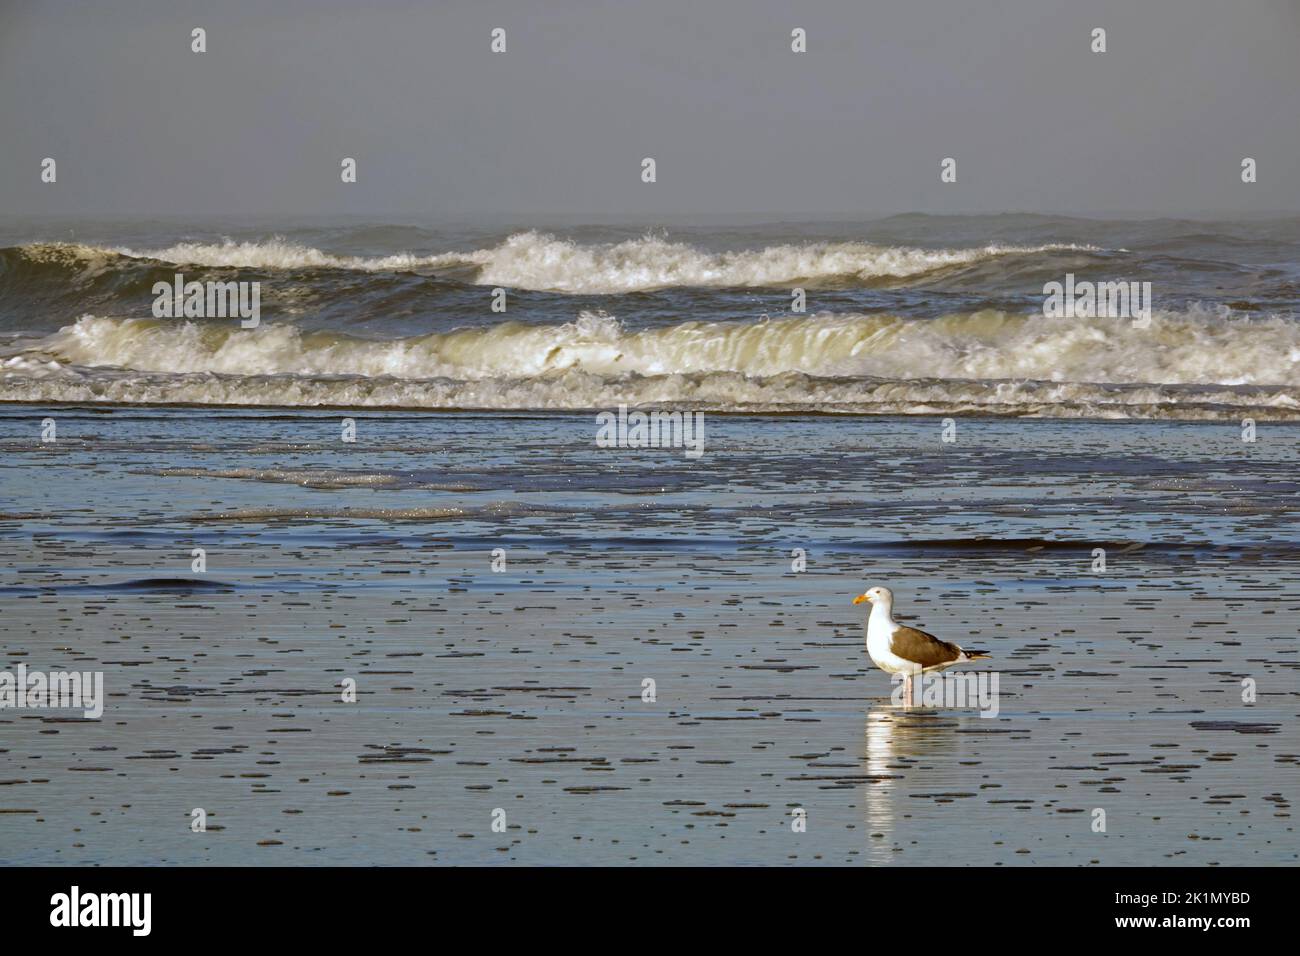 At sunrise, a hungry California seagull searches for food at the high tide line on a beach near the small coastal town of Yachats, Oregon. Stock Photo